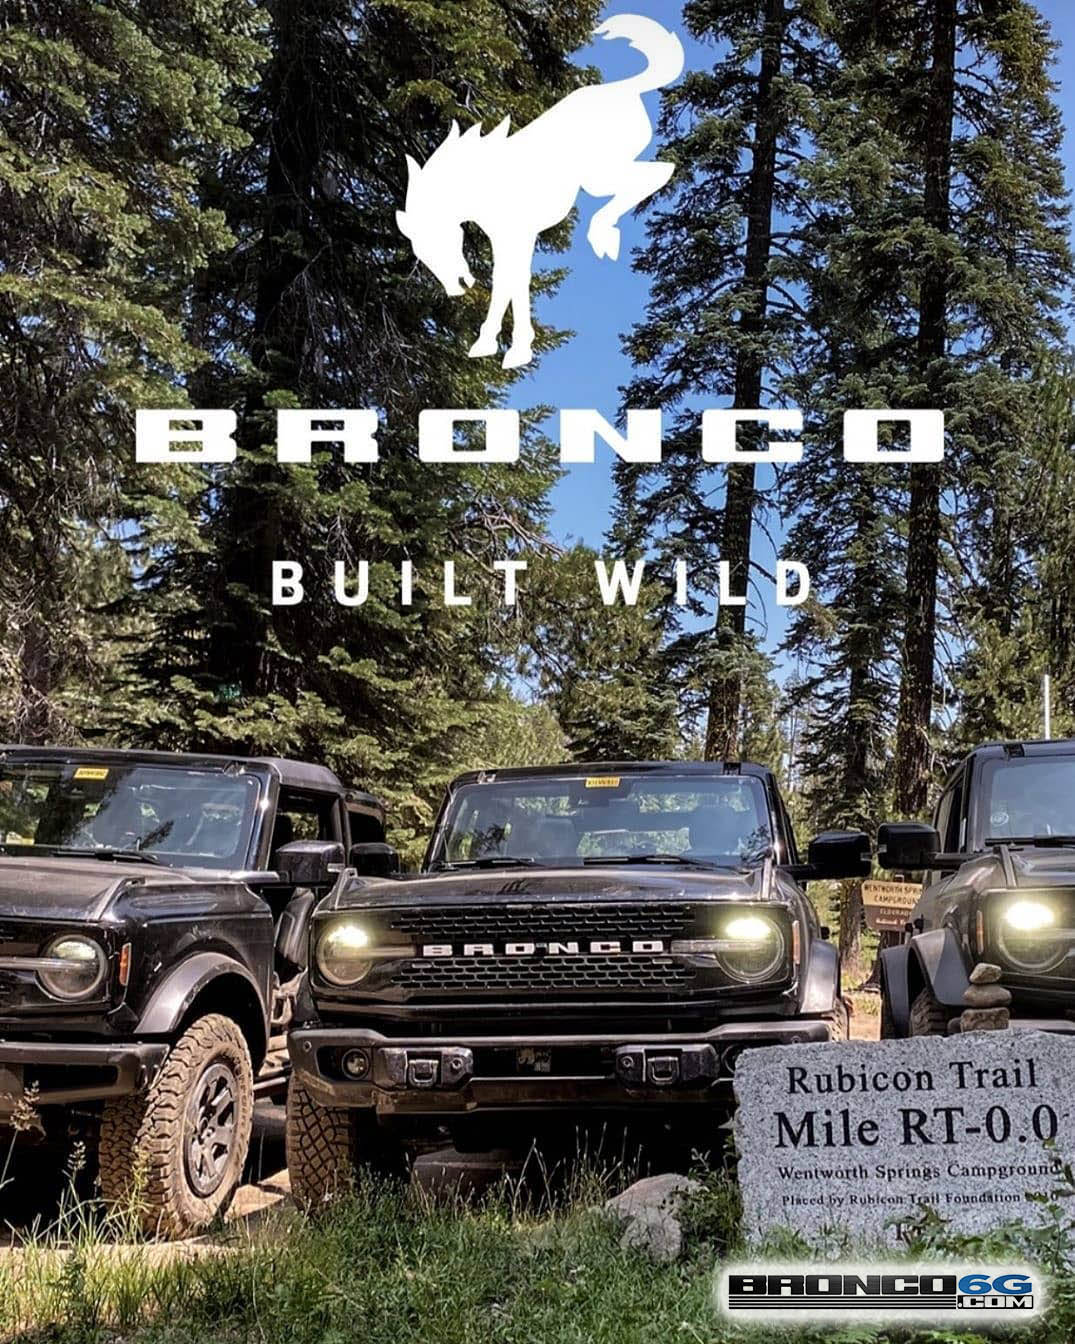 Ford Bronco Exclusive 6+ Minutes of Bronco Badlands Rock Crawling Action on Rubicon Trail 2021 Ford Broncos Conquer Rubicon Trail